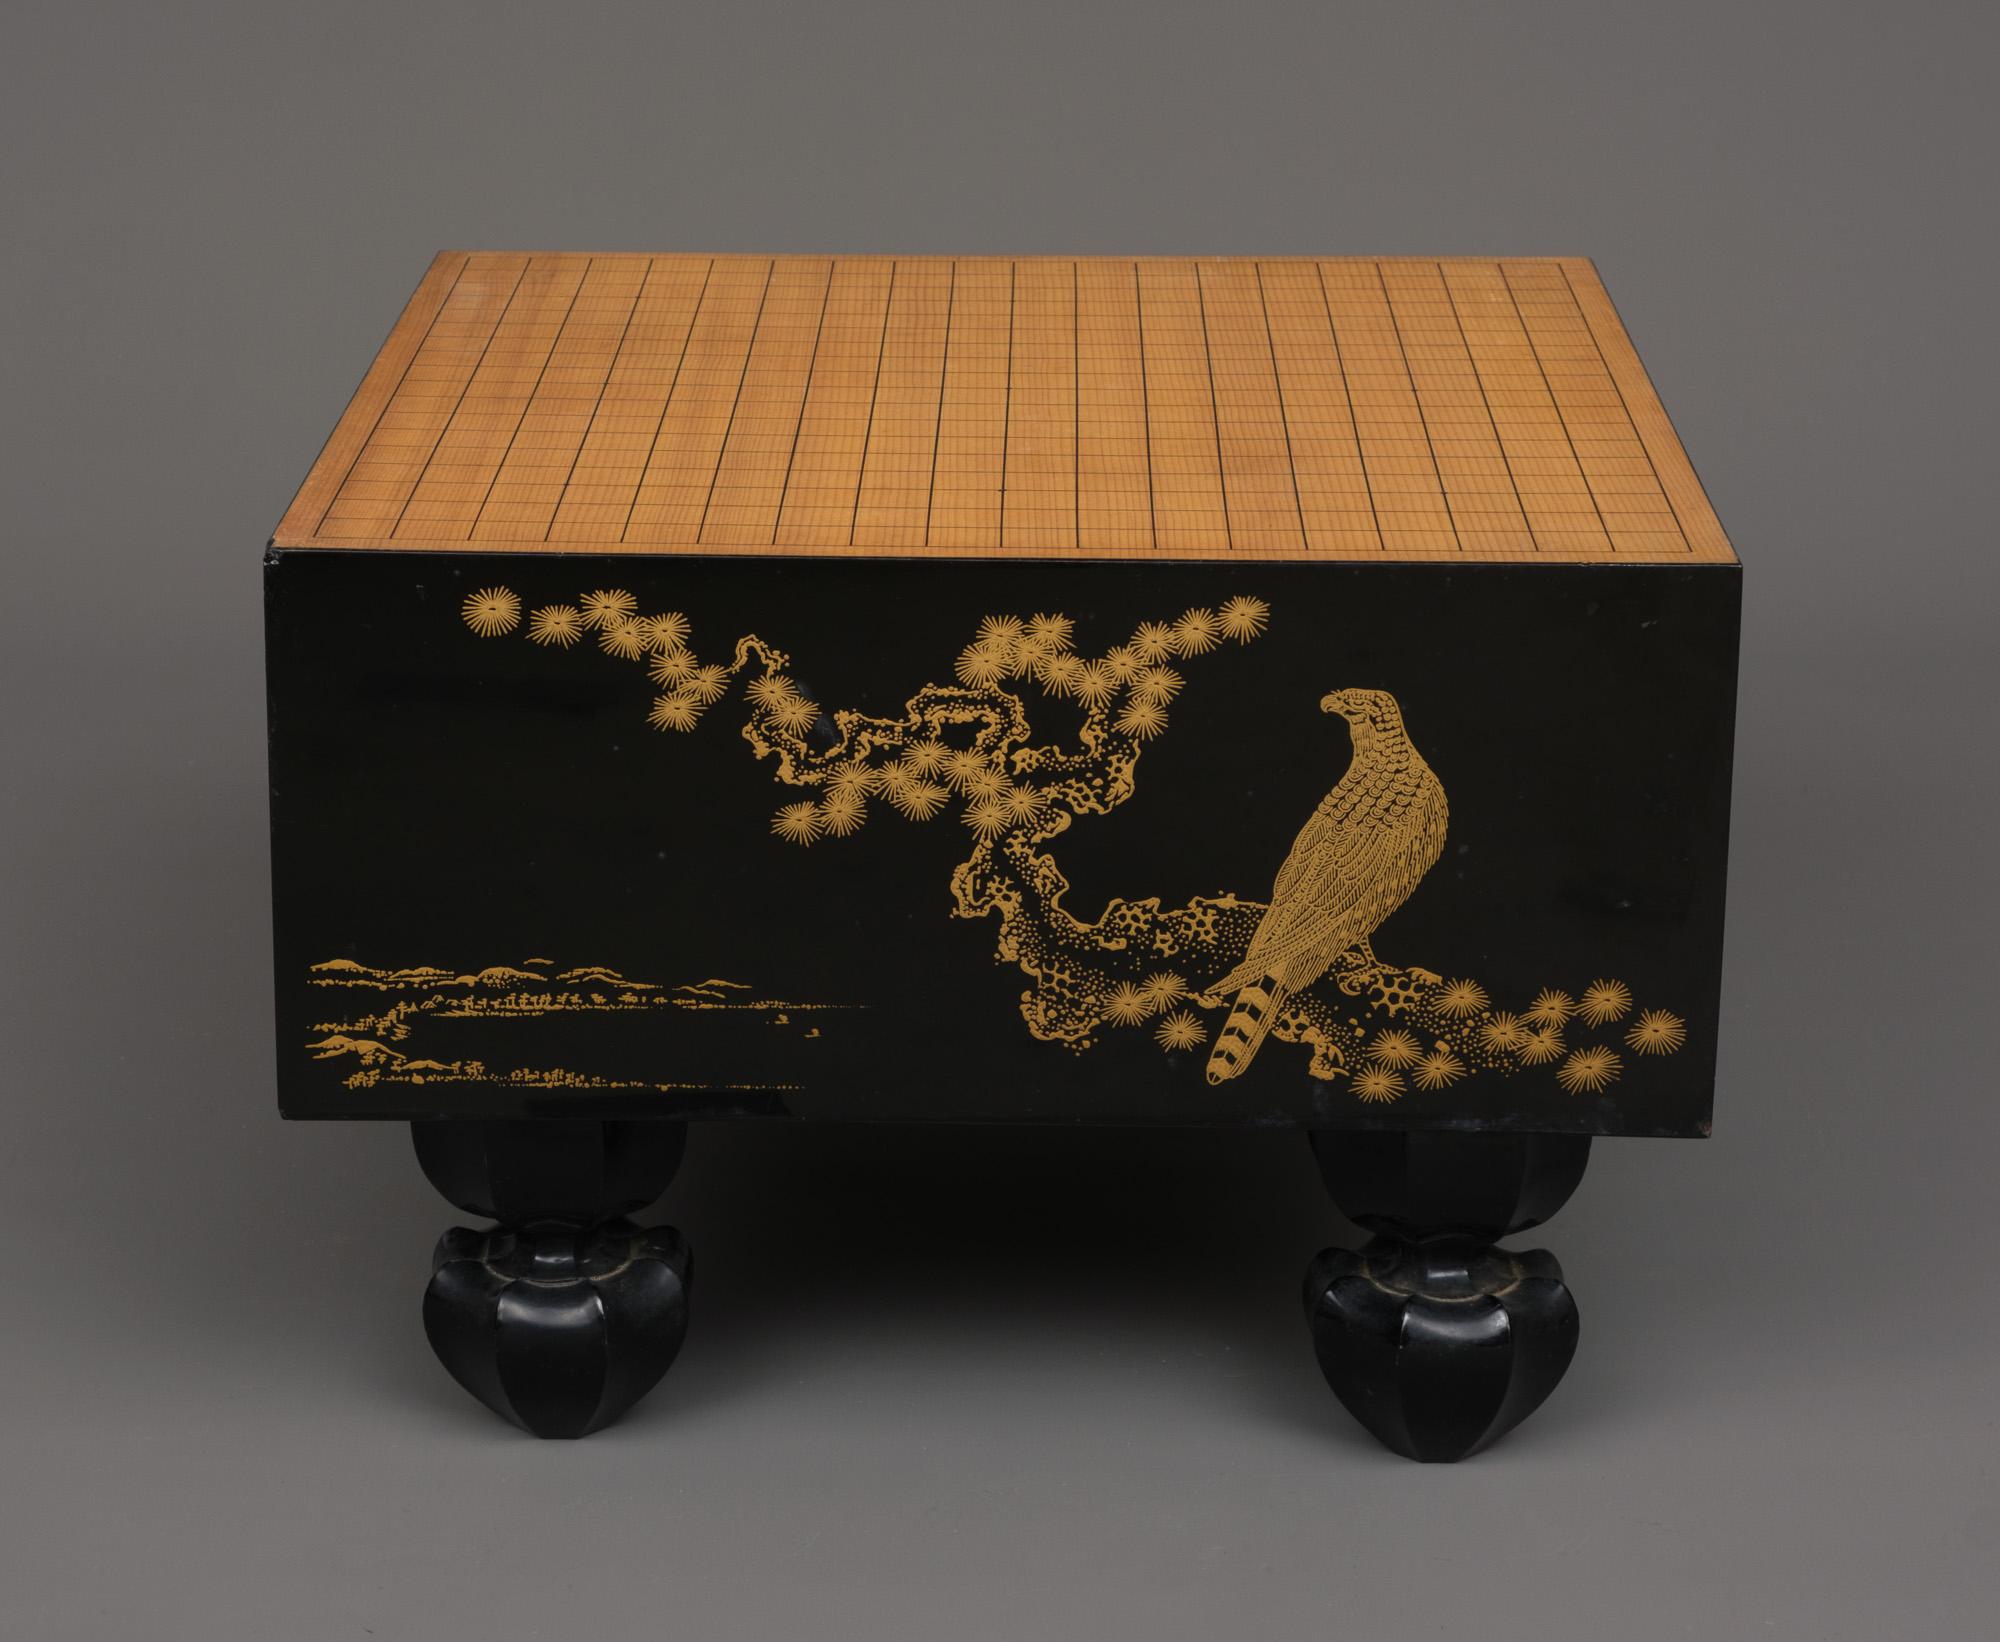 Shell Japanese lacquer solid wooden go-game table 碁盤 (goban) complete with go-stones